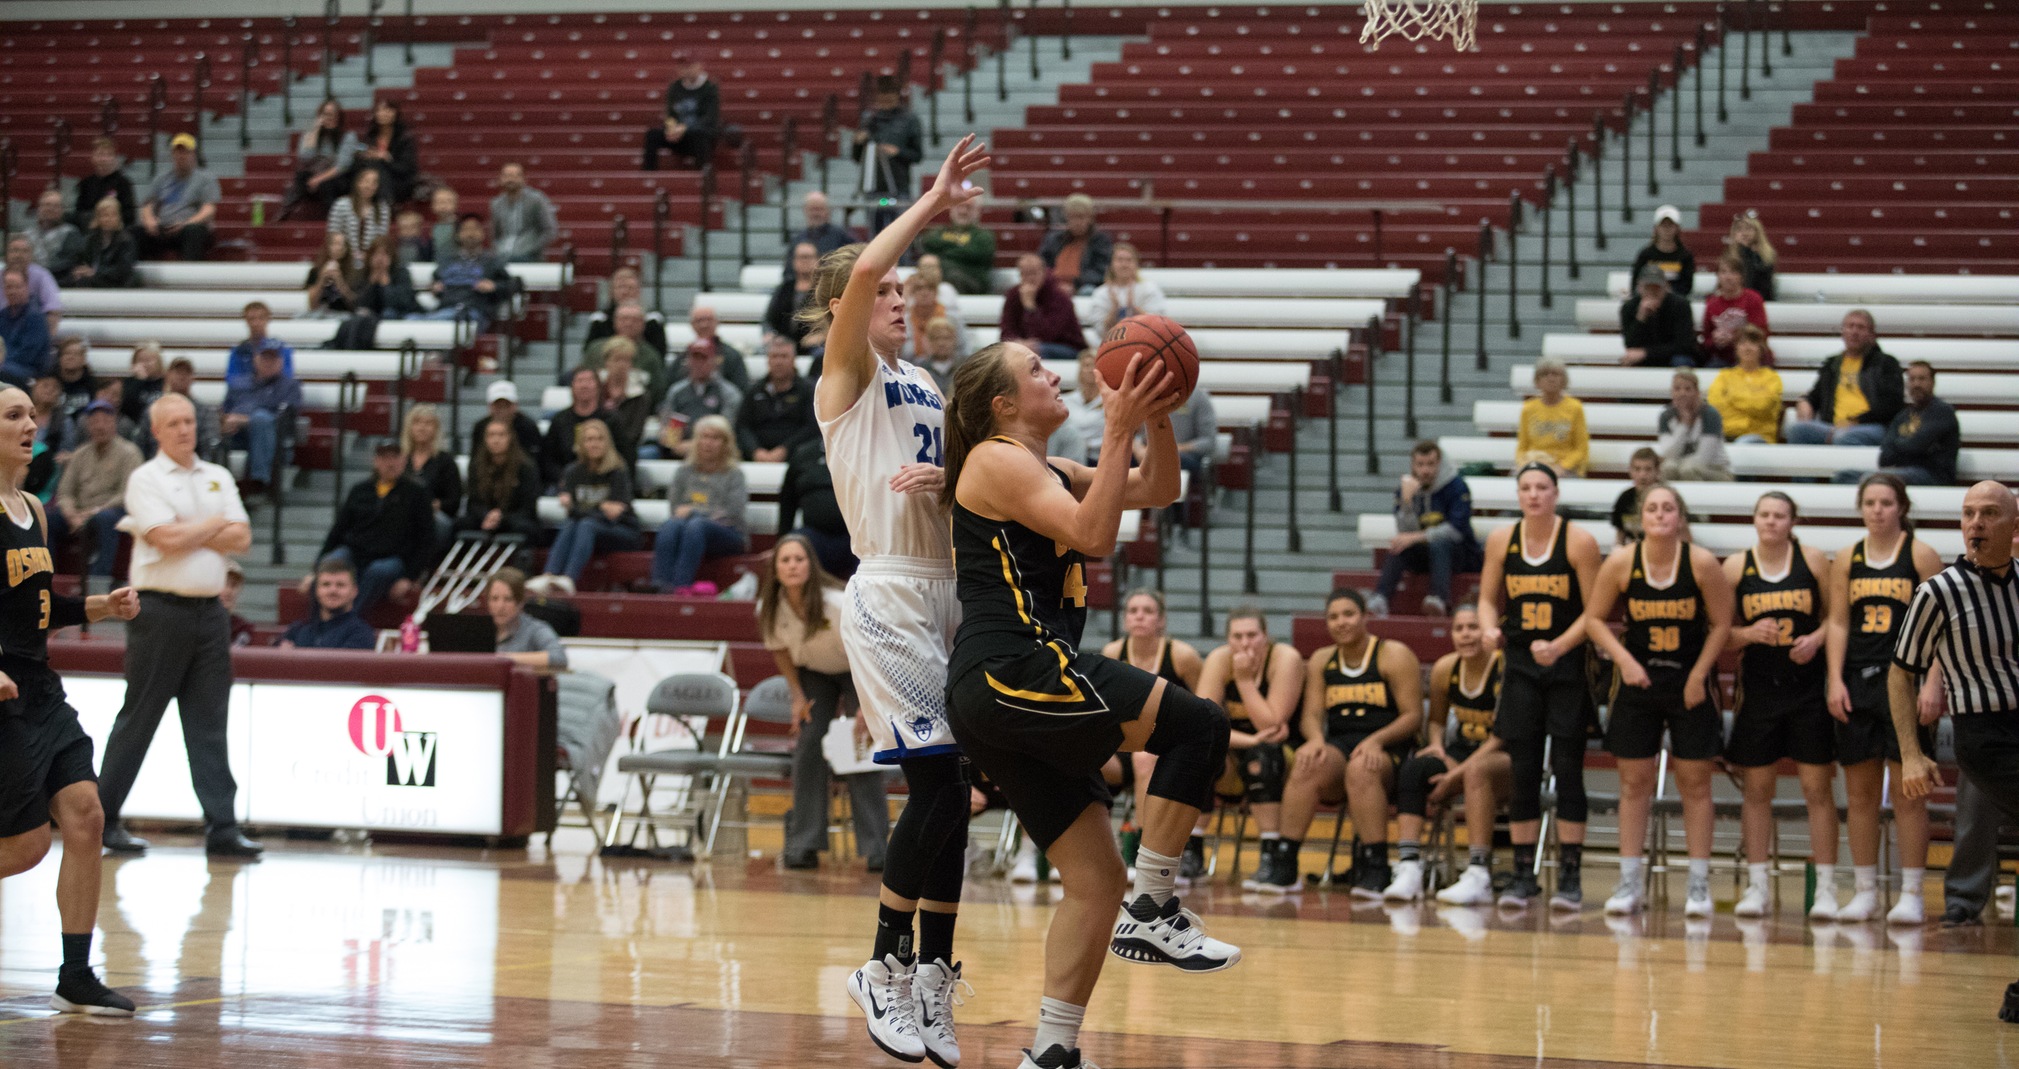 Eliza Campbell scored 28 points, one point shy of her career high, against the Norse.